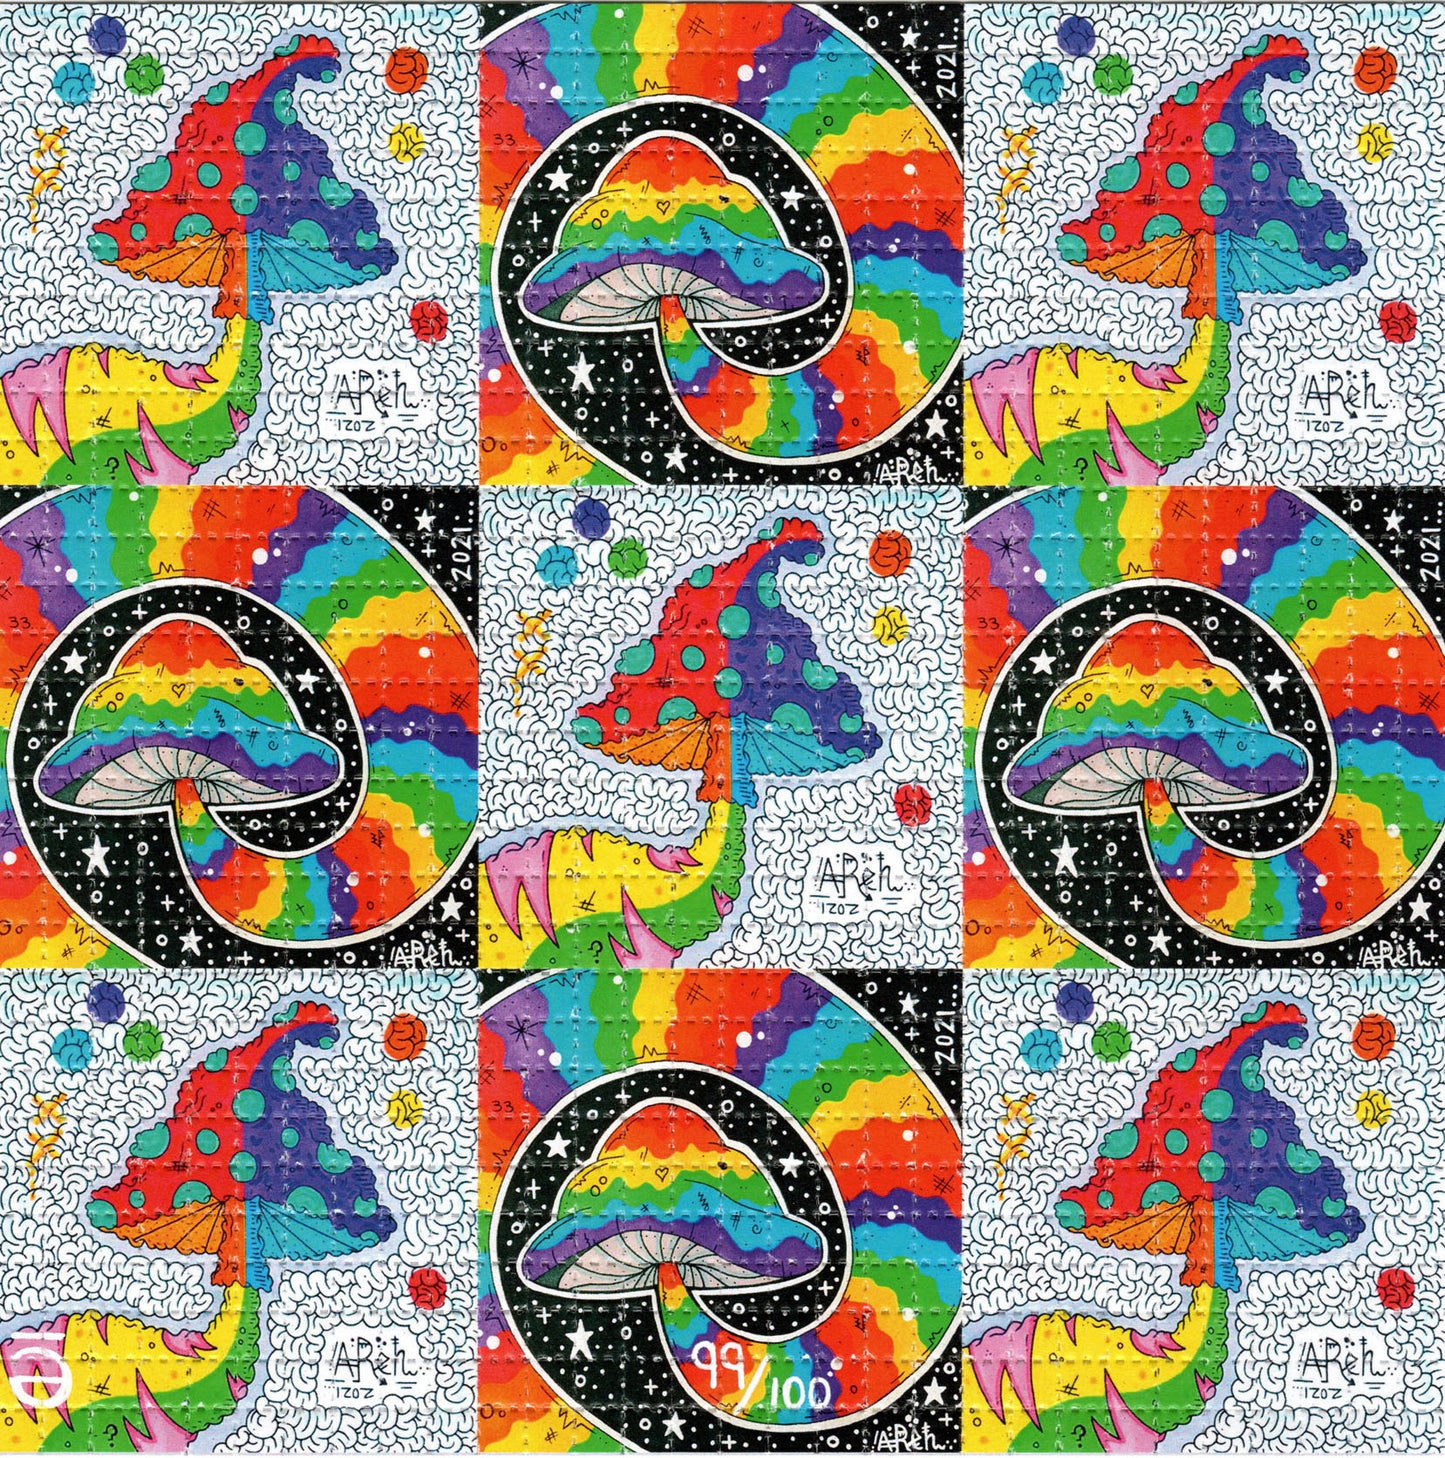 Mushrooms X9  by Aaron Rehschuh Areh SIGNED Limited Edition LSD blotter art print